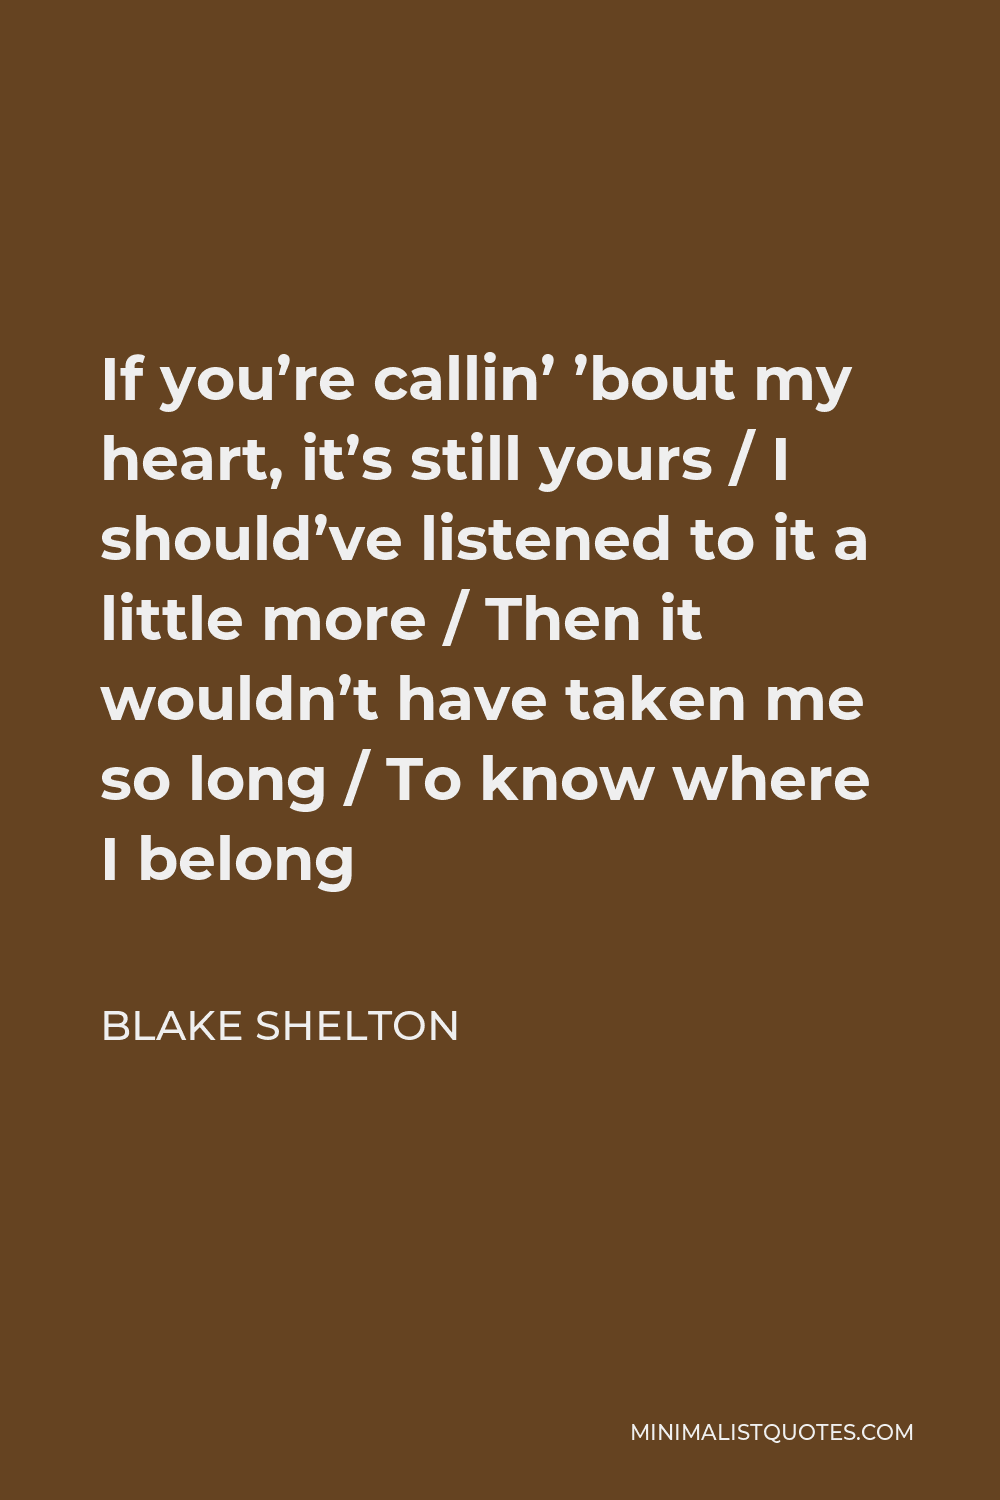 Blake Shelton Quote - If you’re callin’ ’bout my heart, it’s still yours / I should’ve listened to it a little more / Then it wouldn’t have taken me so long / To know where I belong